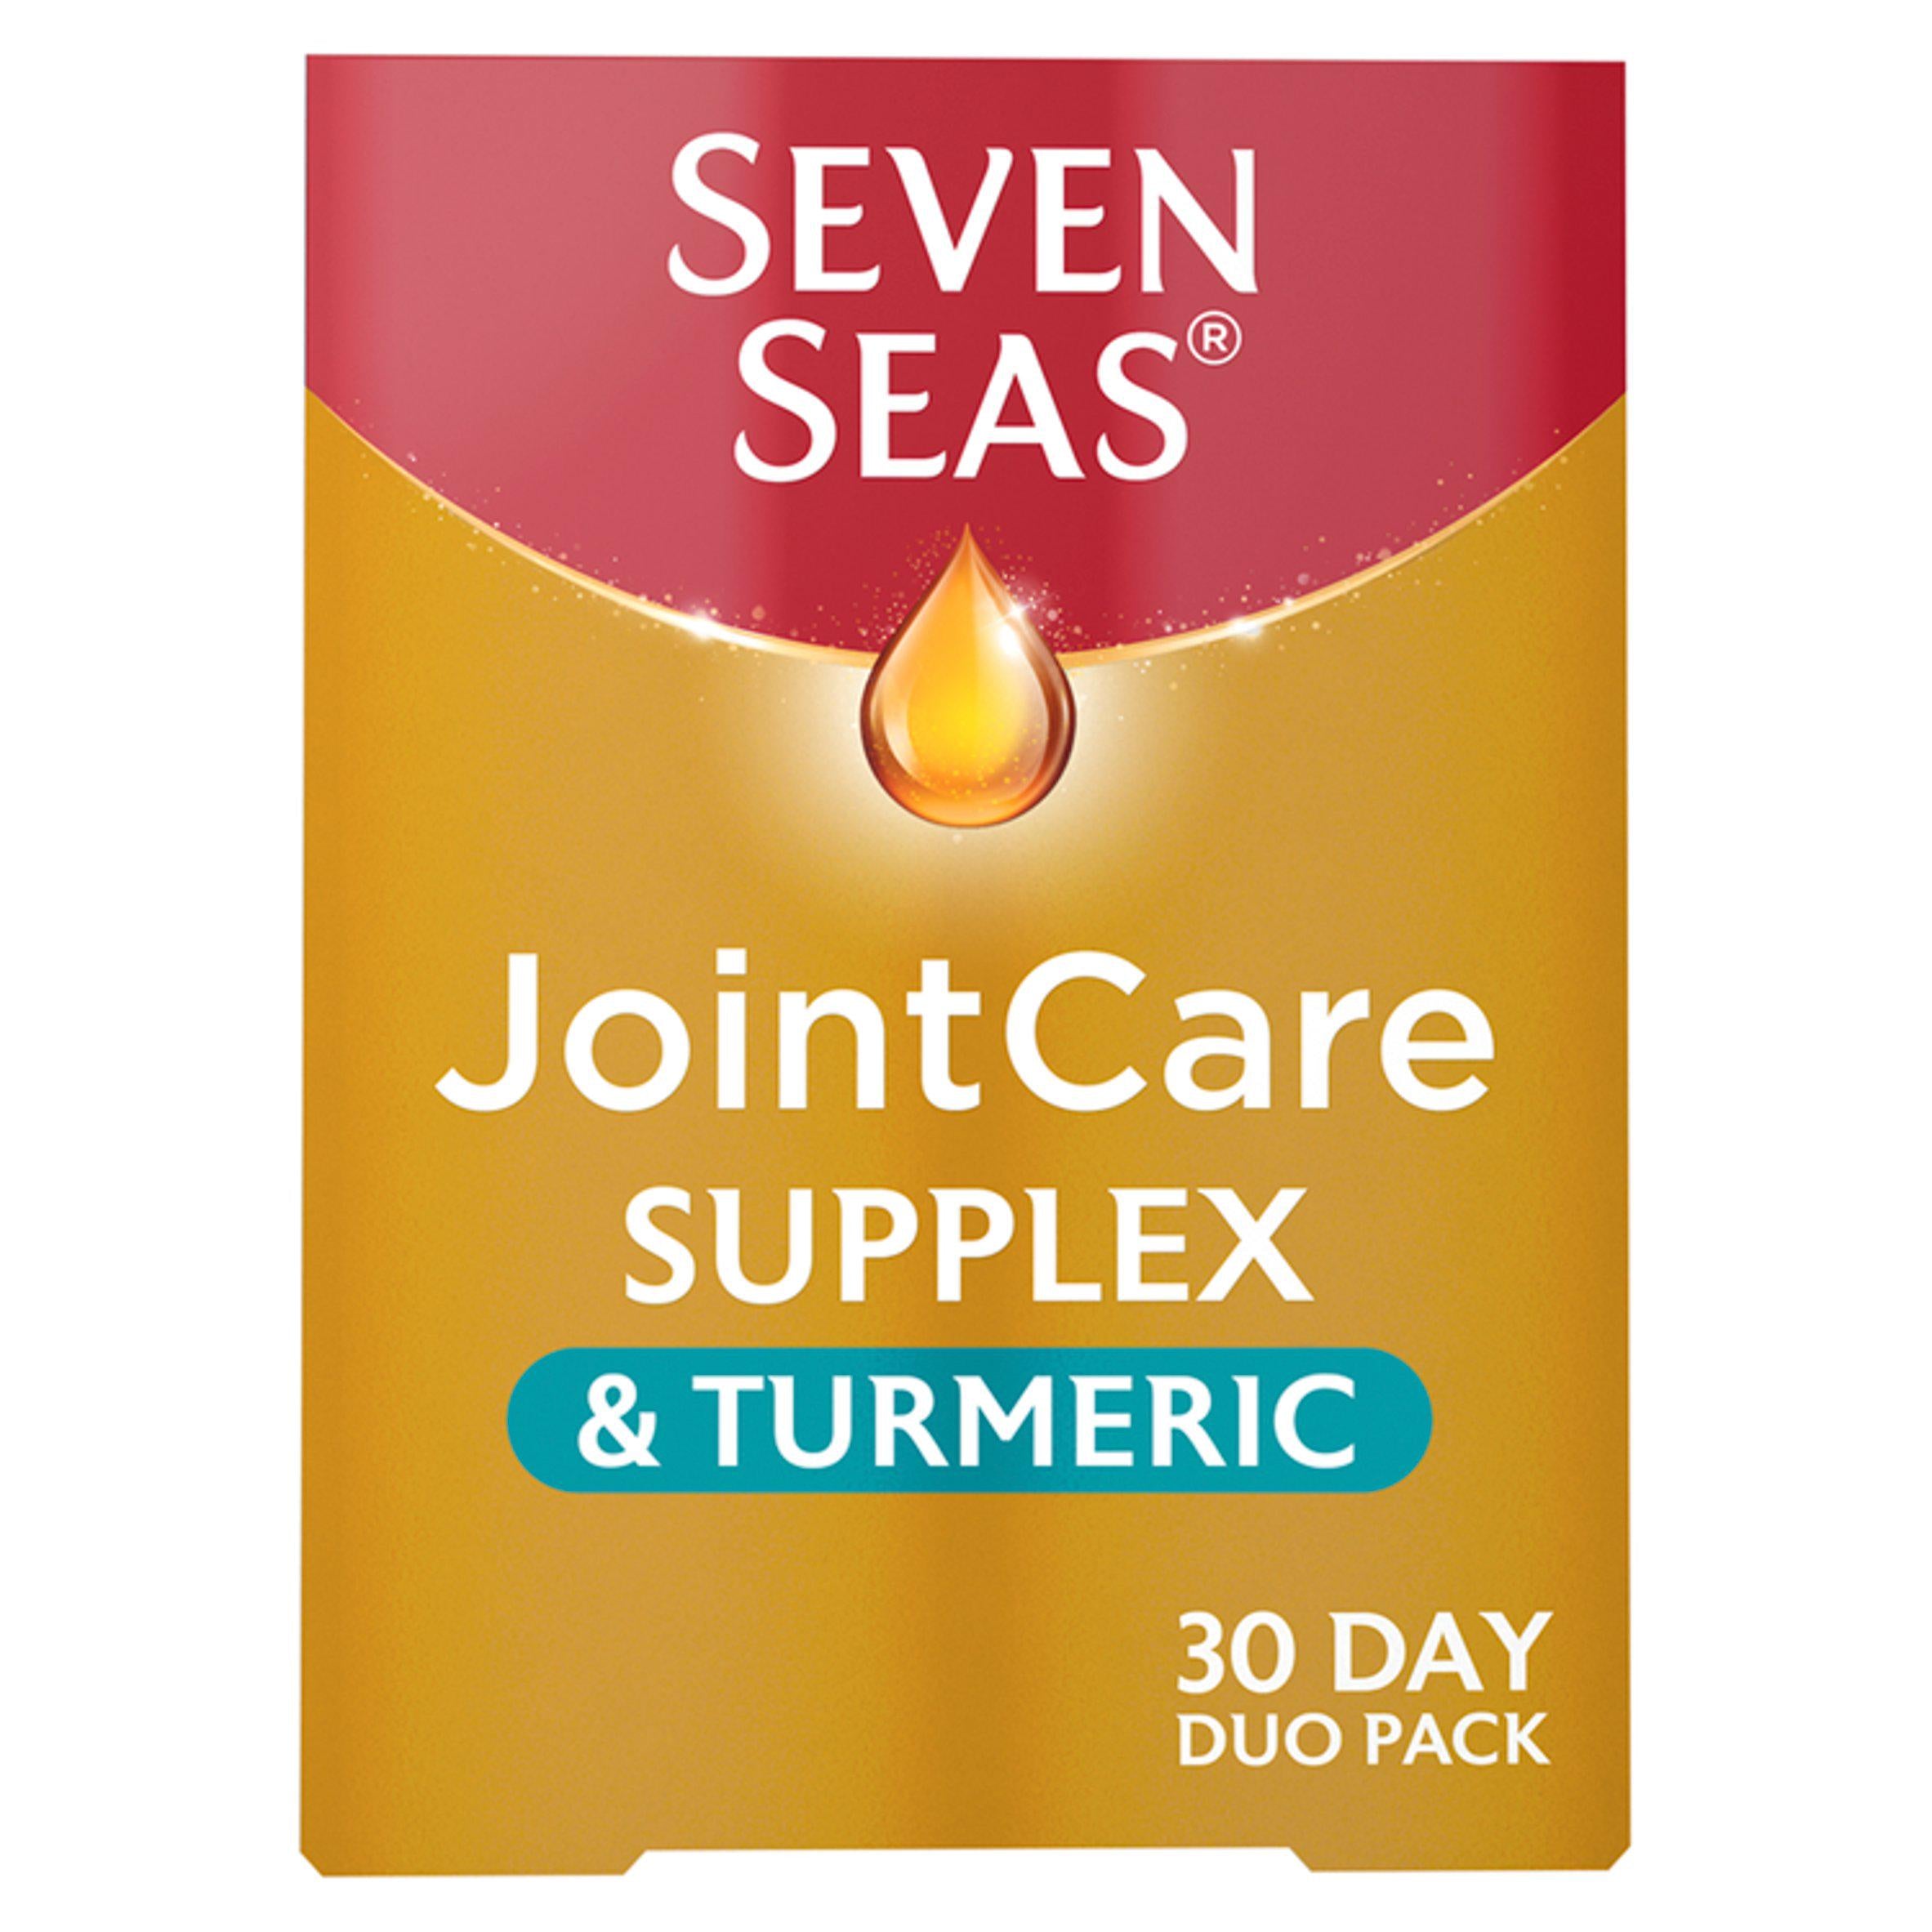 Seven Seas Jointcare Supplex & Turmeric with Glucosamine 30 Day Duo Pack GOODS Sainsburys   